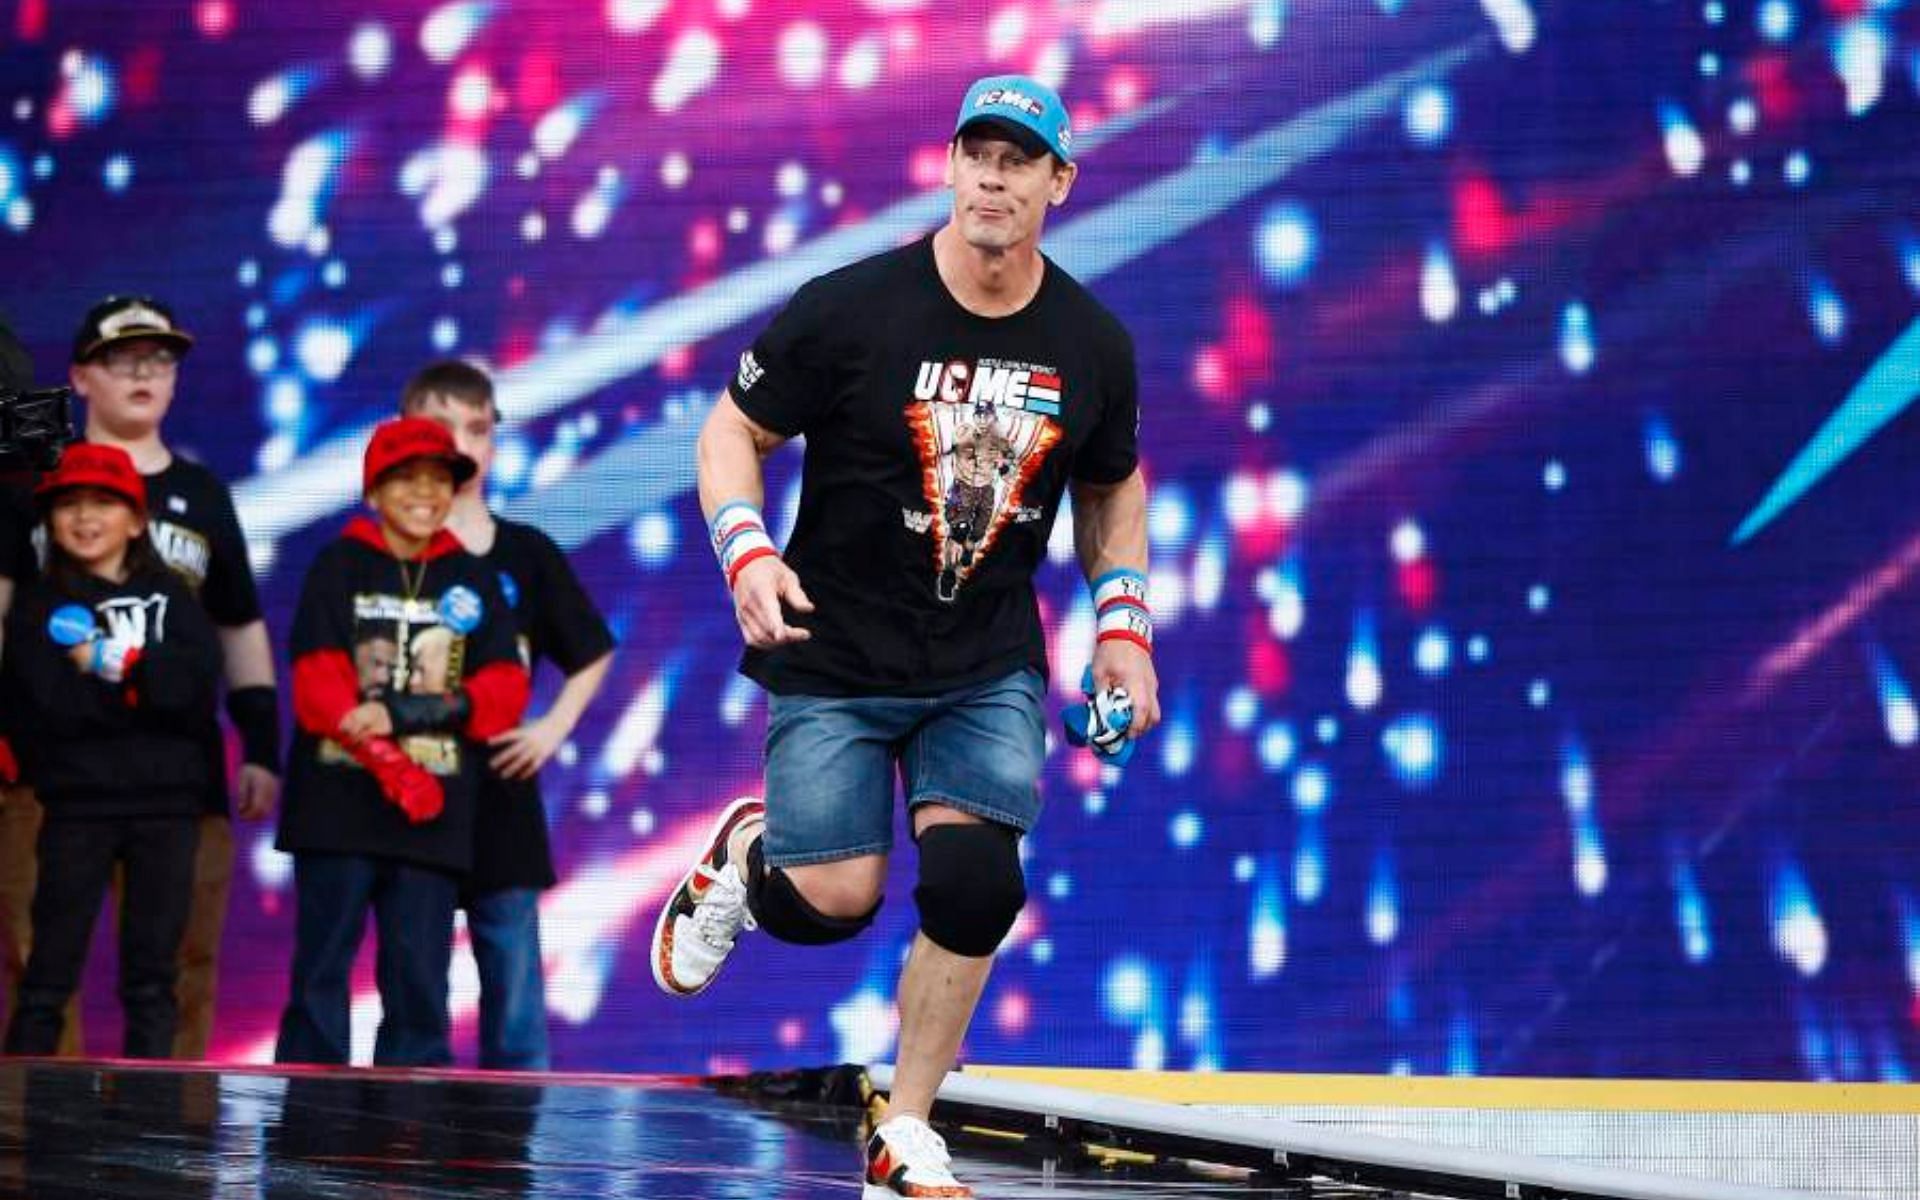 One of the most recognizable wrestlers of all time, John Cena